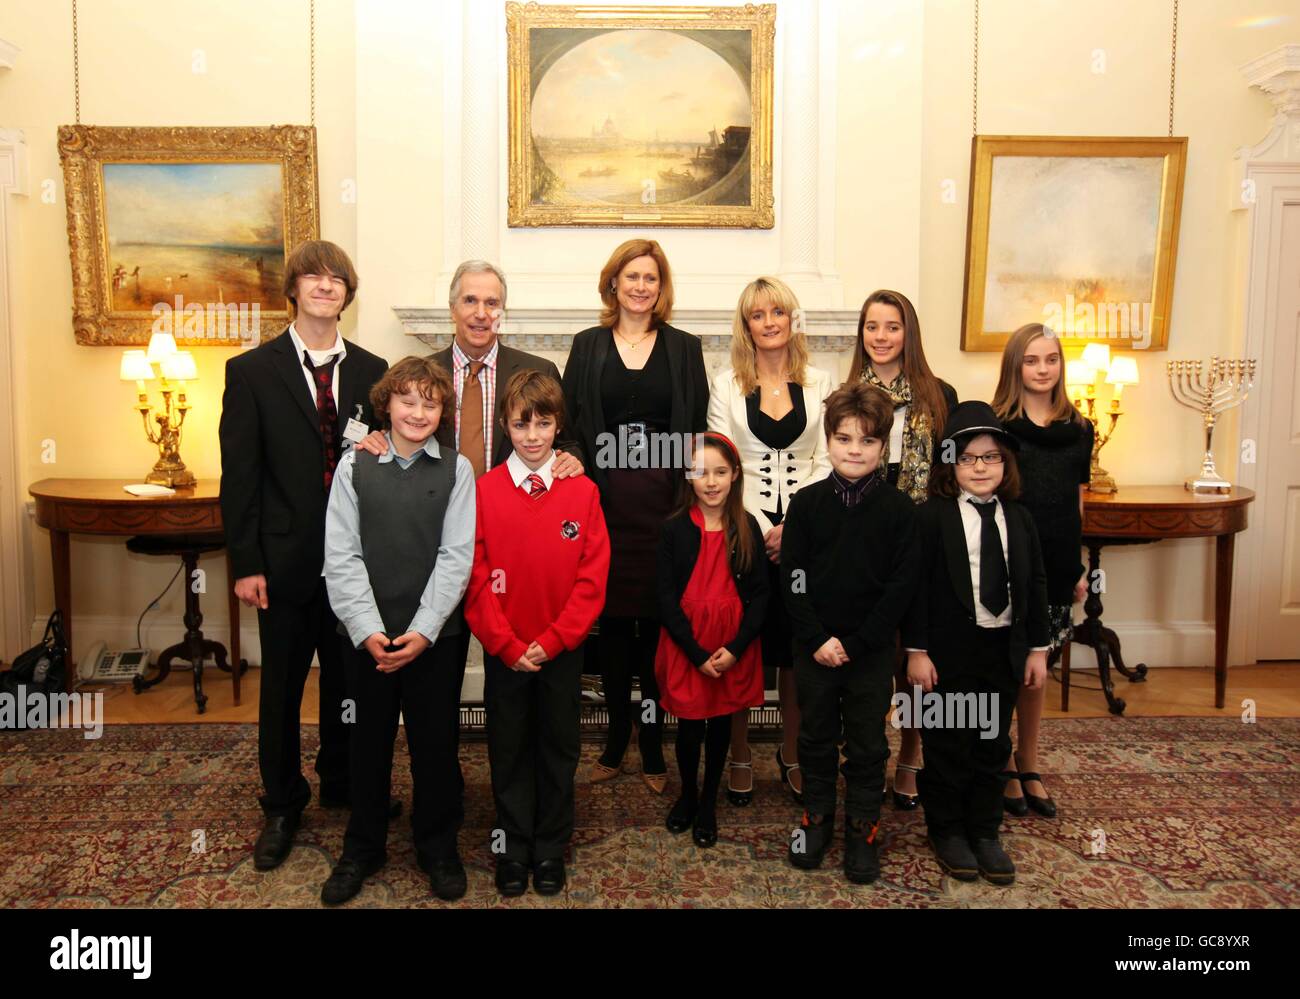 (Back row, left to right) Barney Cox, Henry Winkler, Sarah Brown, Nicky Cox, Bethany Cox, Daisy Cox (front row, left to right) Ben Hunter, Ryan King, Liberty Cox, Isaac Lyons and Evie Lyons pose for a photograph at the launch of the First News My Way! campaign, a scheme to help children with special educational needs, in Downing Street, London. Stock Photo